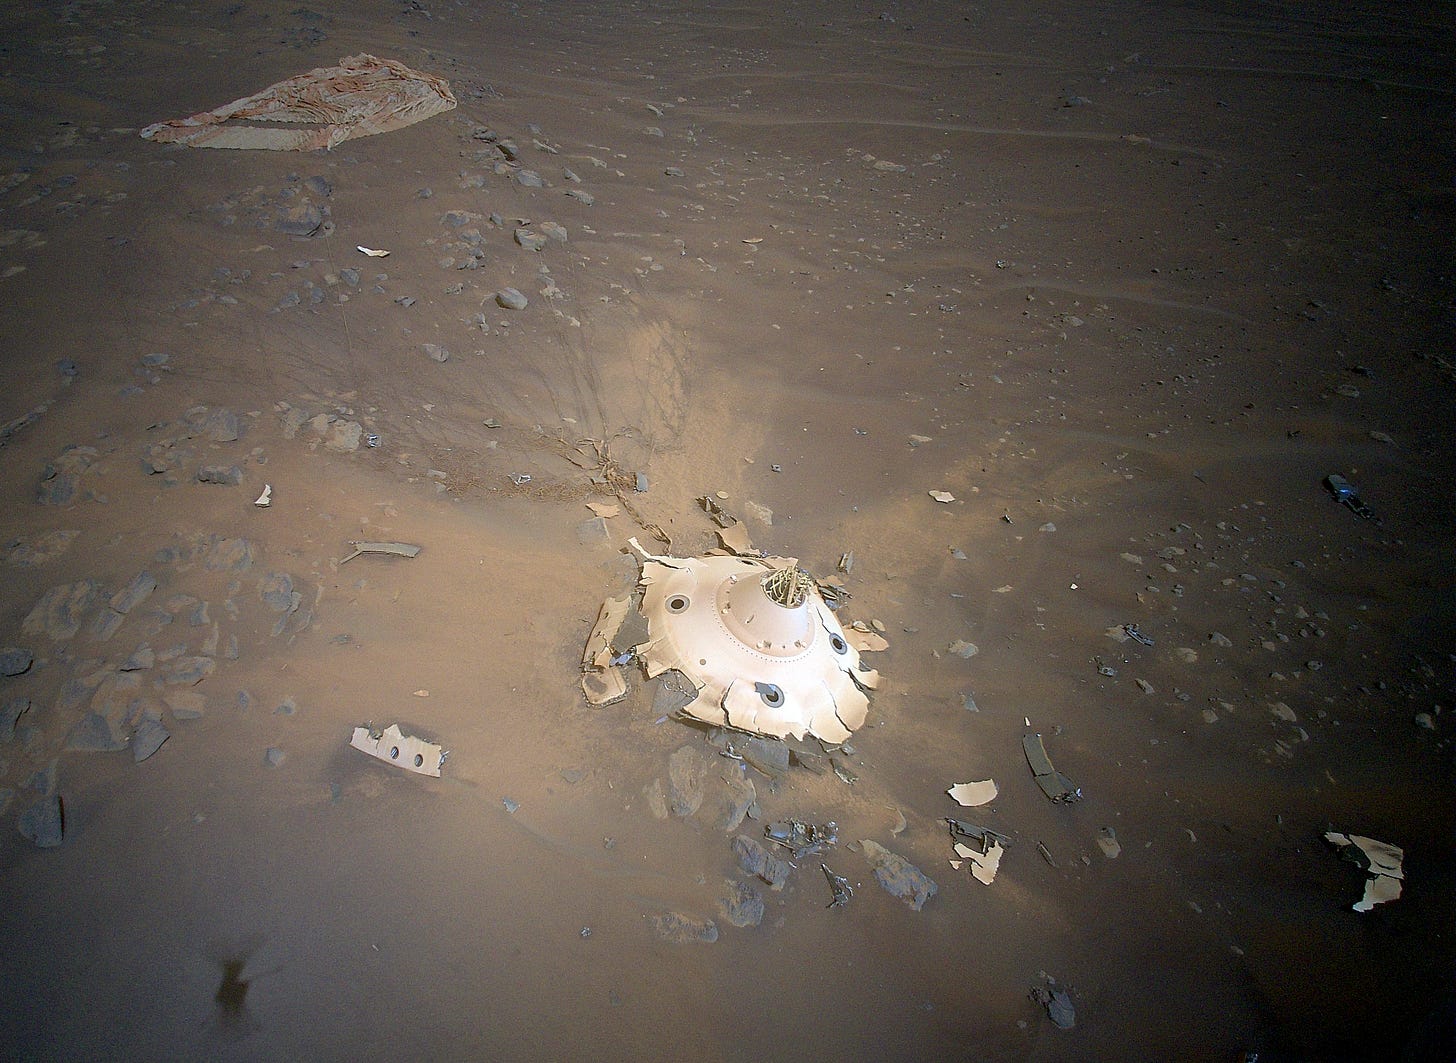 The pale, smashed backshell of the Persverance rover lies on the red-brown surface of Mars, surrounded by smaller pieces of debris. The collapsed and tattered parachute lies in the background.